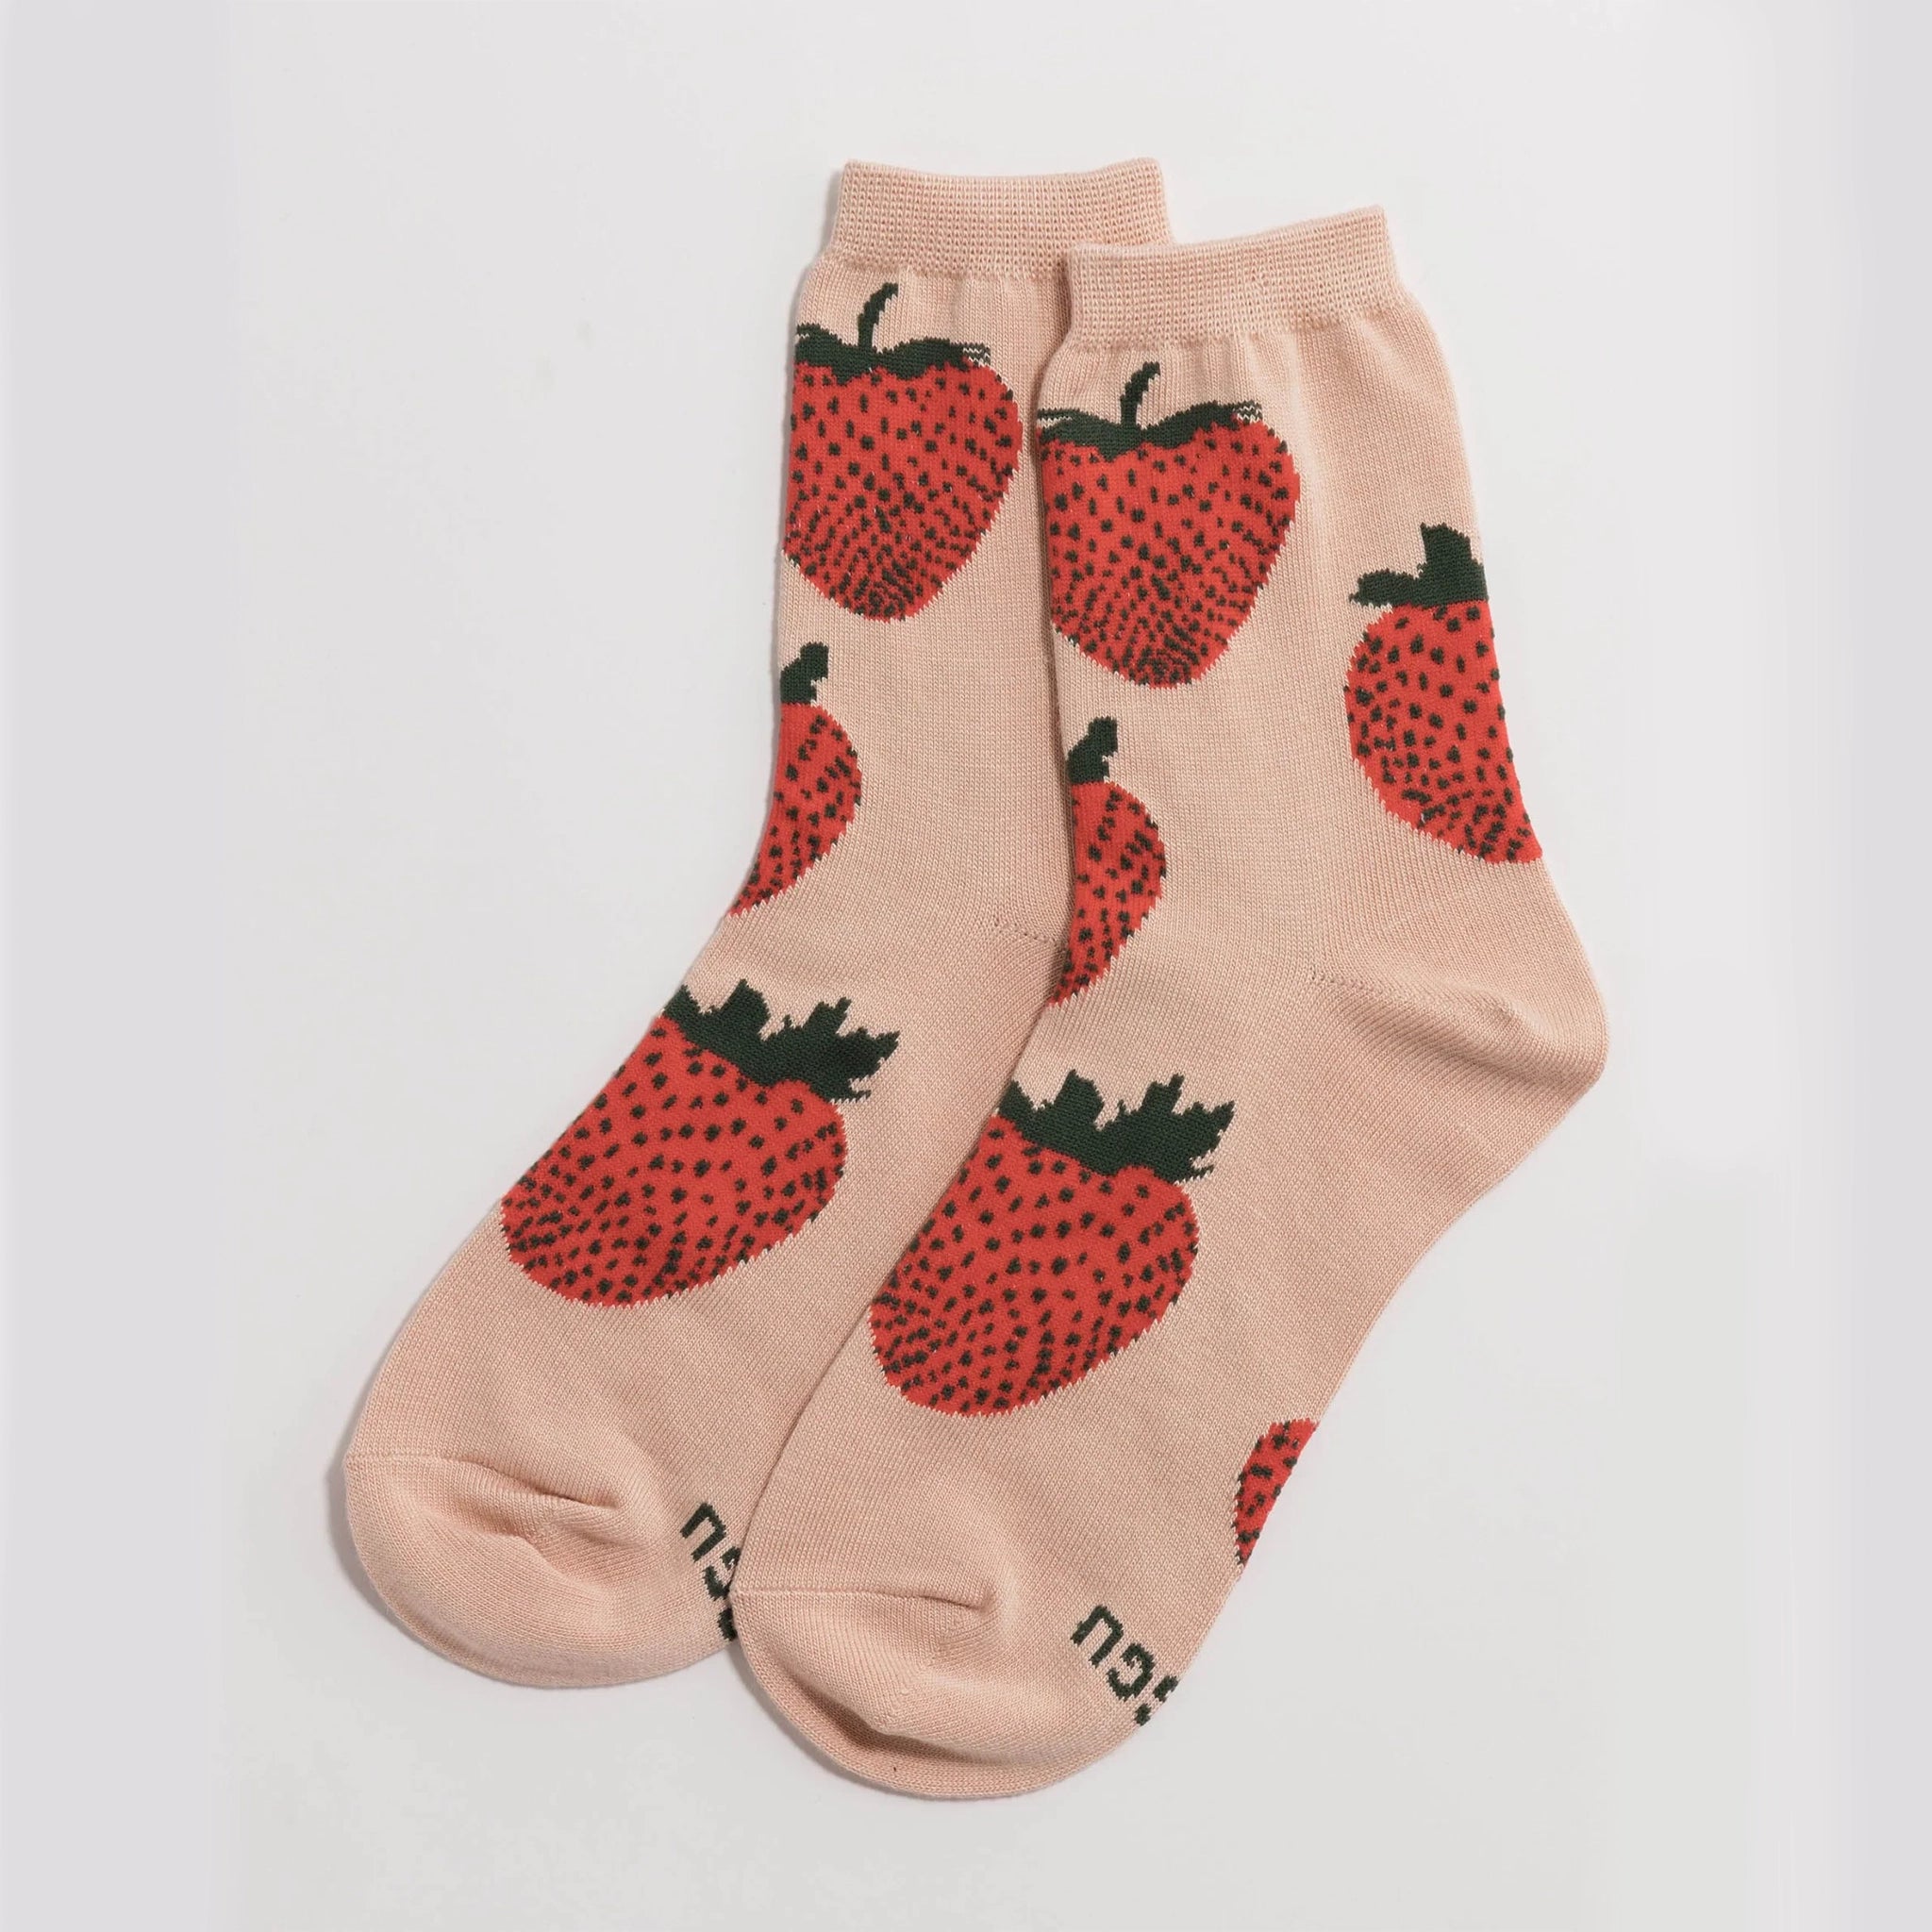 On a white background is a pair of pink crew socks with a red strawberry pattern on it.